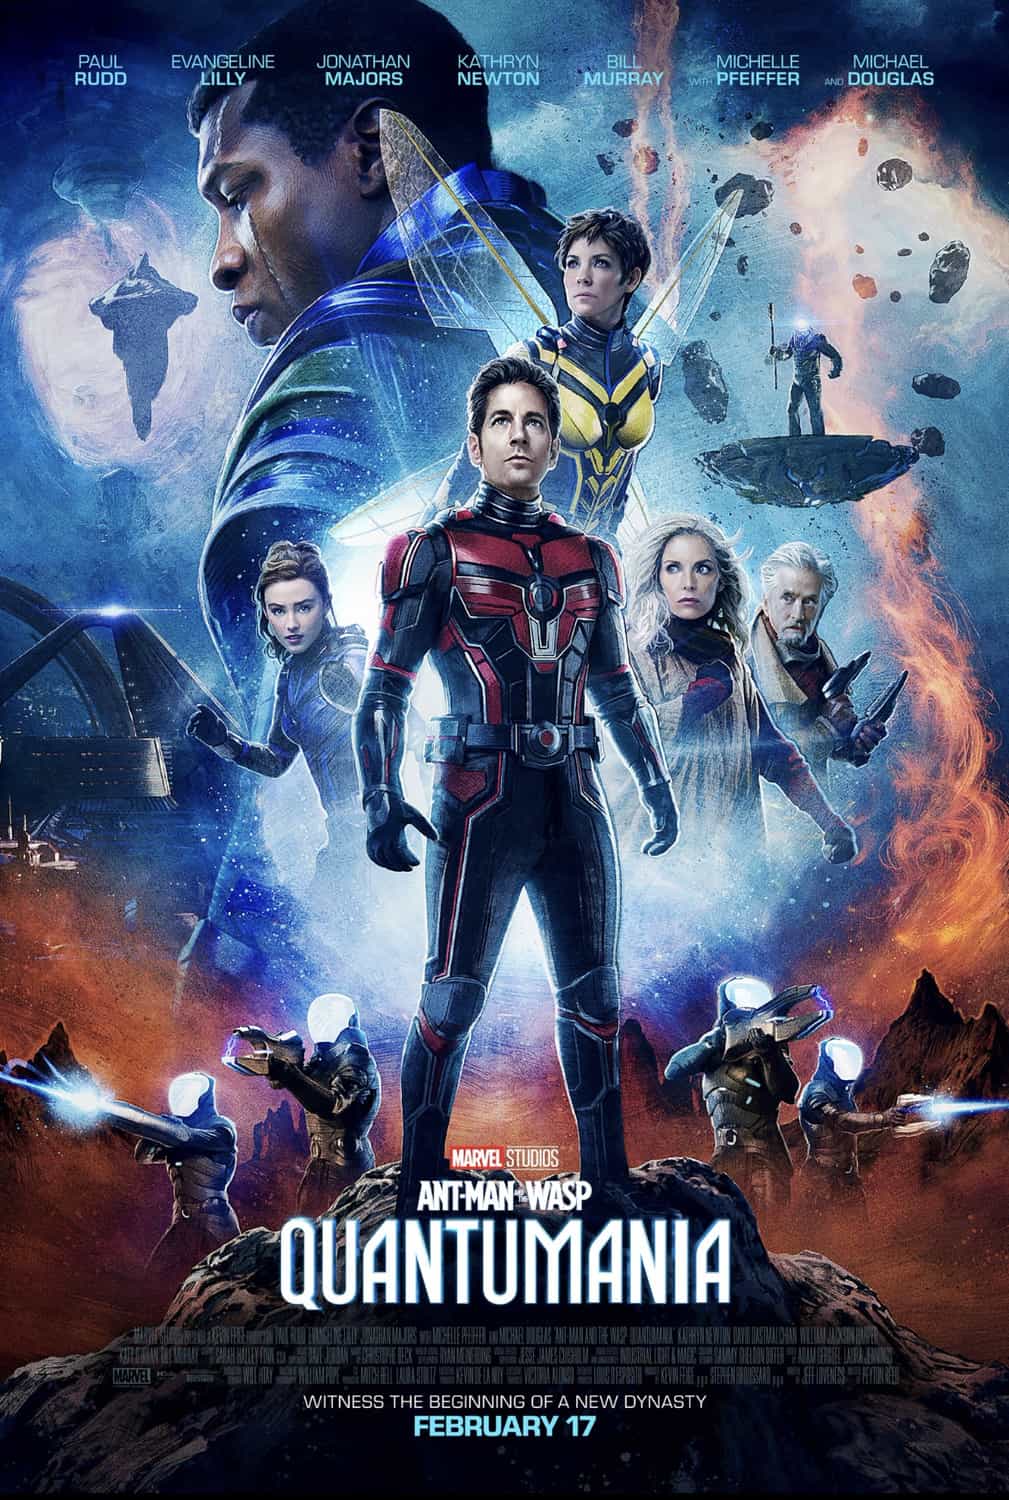 New trailer and poster released for Ant-Man and the Wasp: Quantumania starring Paul Rudd - movie UK release date 17th February 2023 #antmanandthewaspquantumania